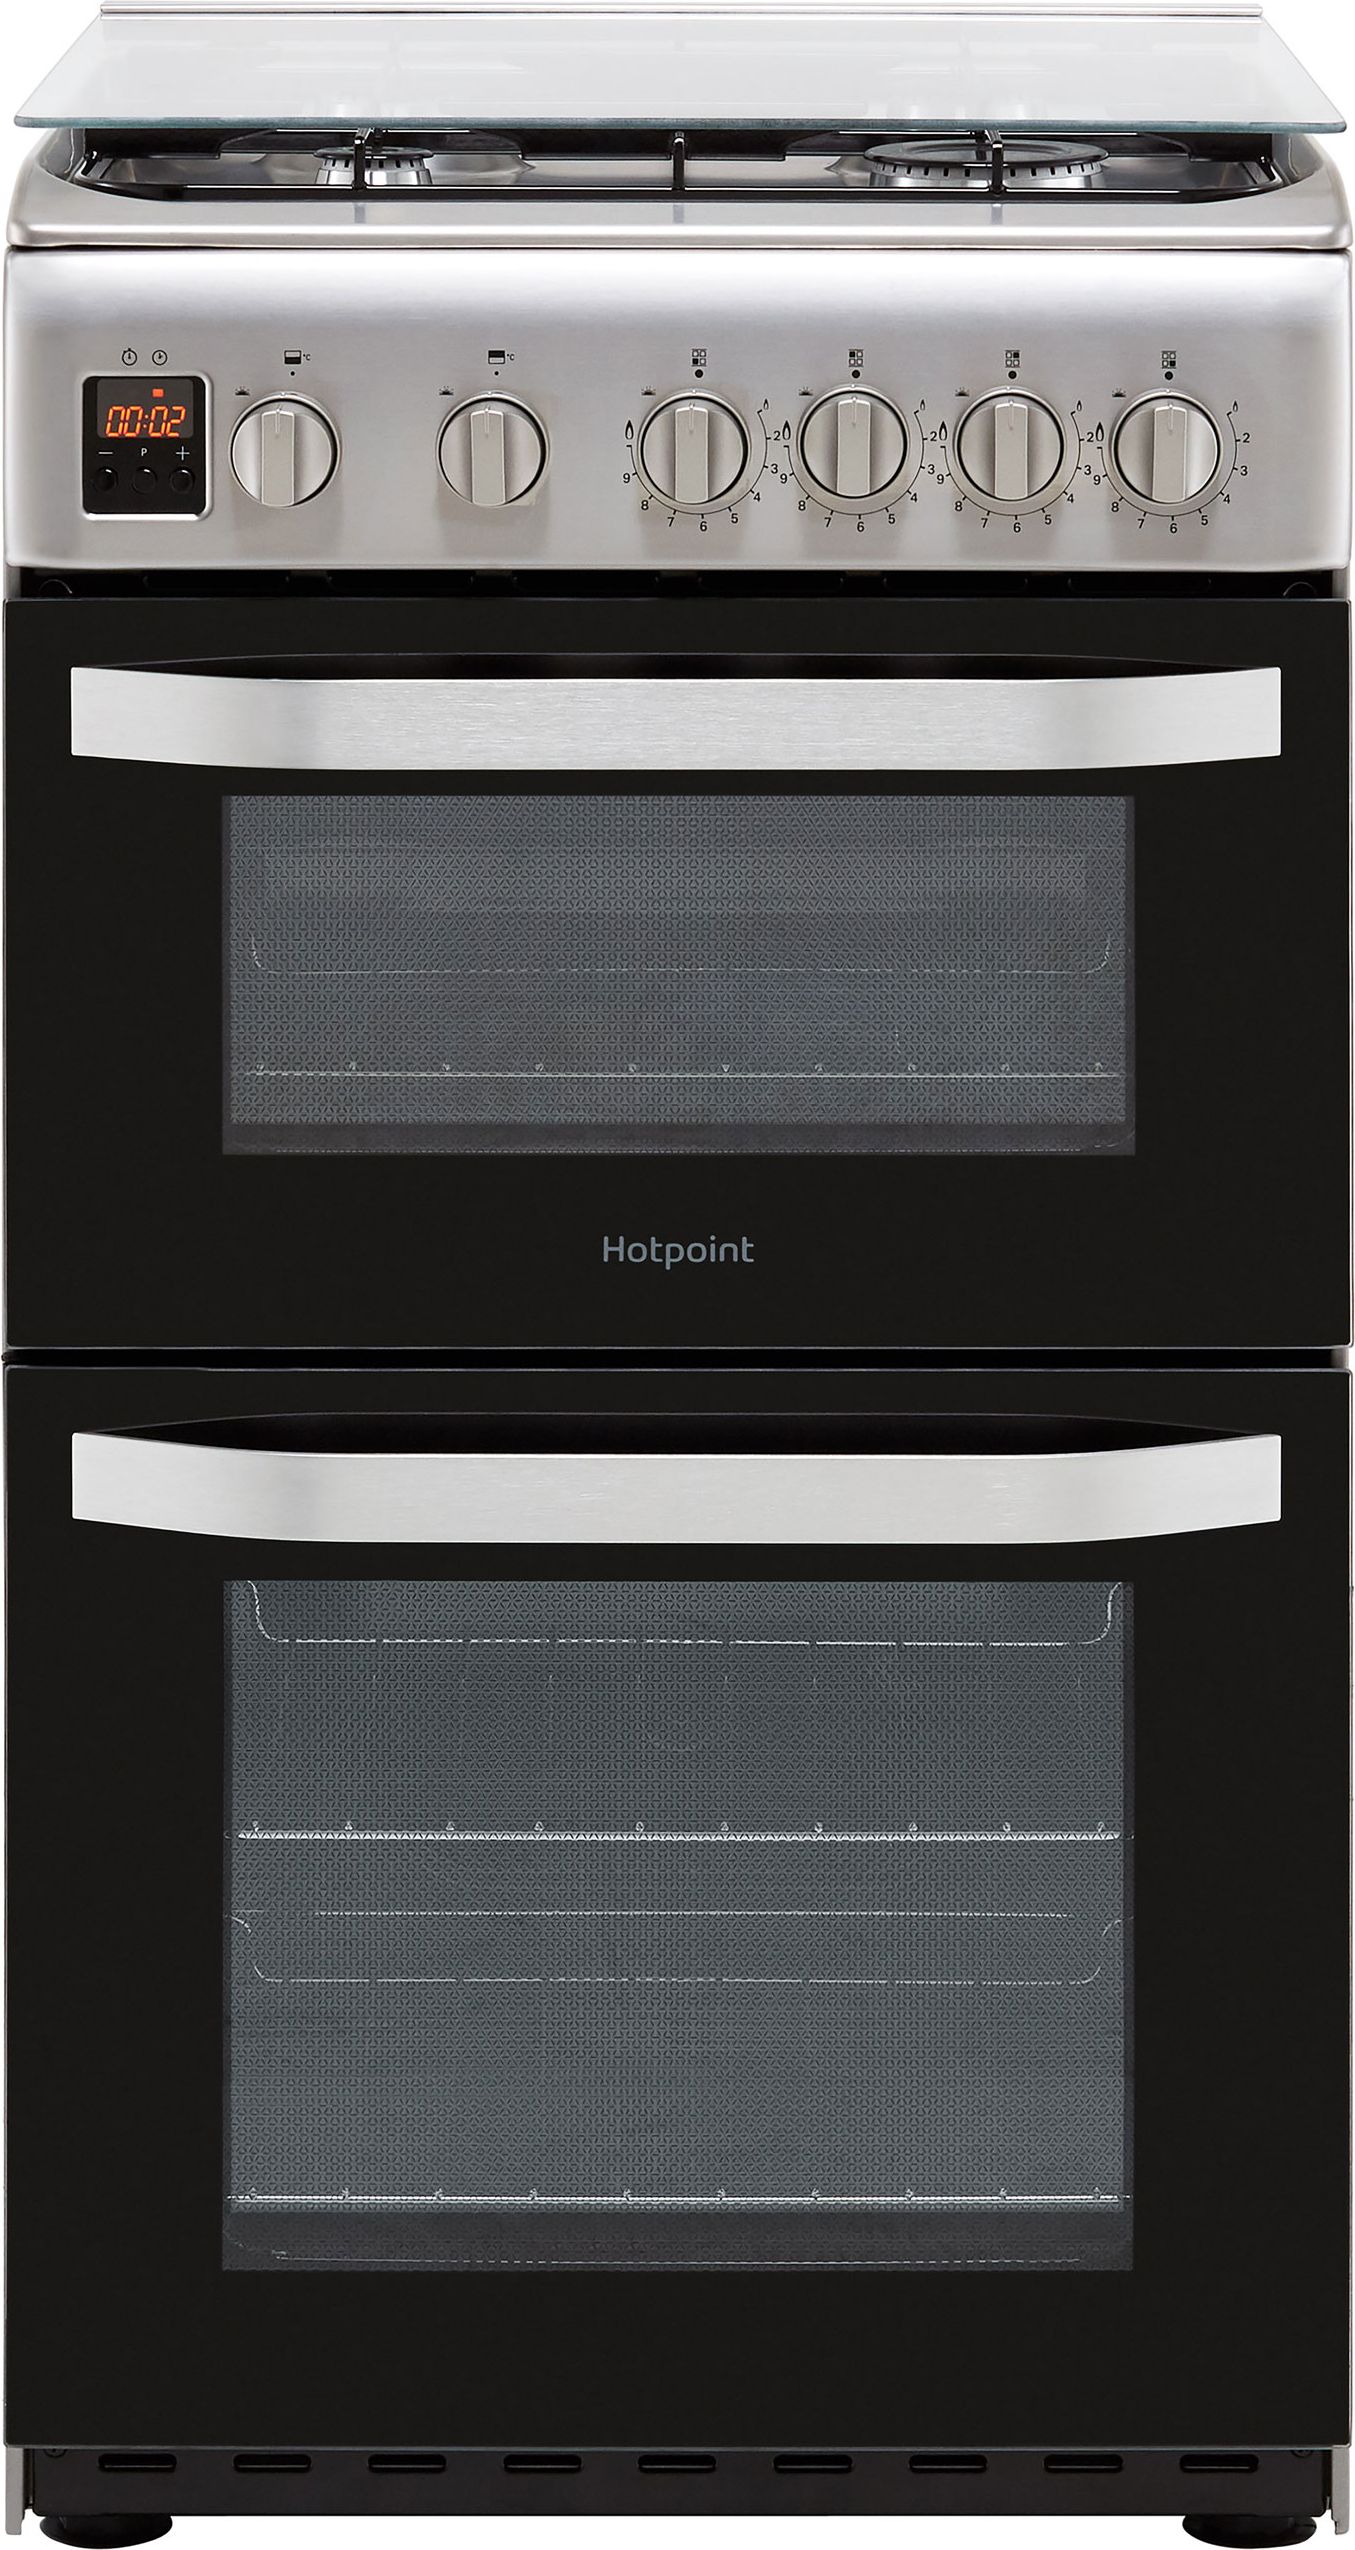 Hotpoint Cloe HD5G00CCX 50cm Freestanding Gas Cooker with Full Width Gas Grill - Stainless Steel - A Rated, Stainless Steel